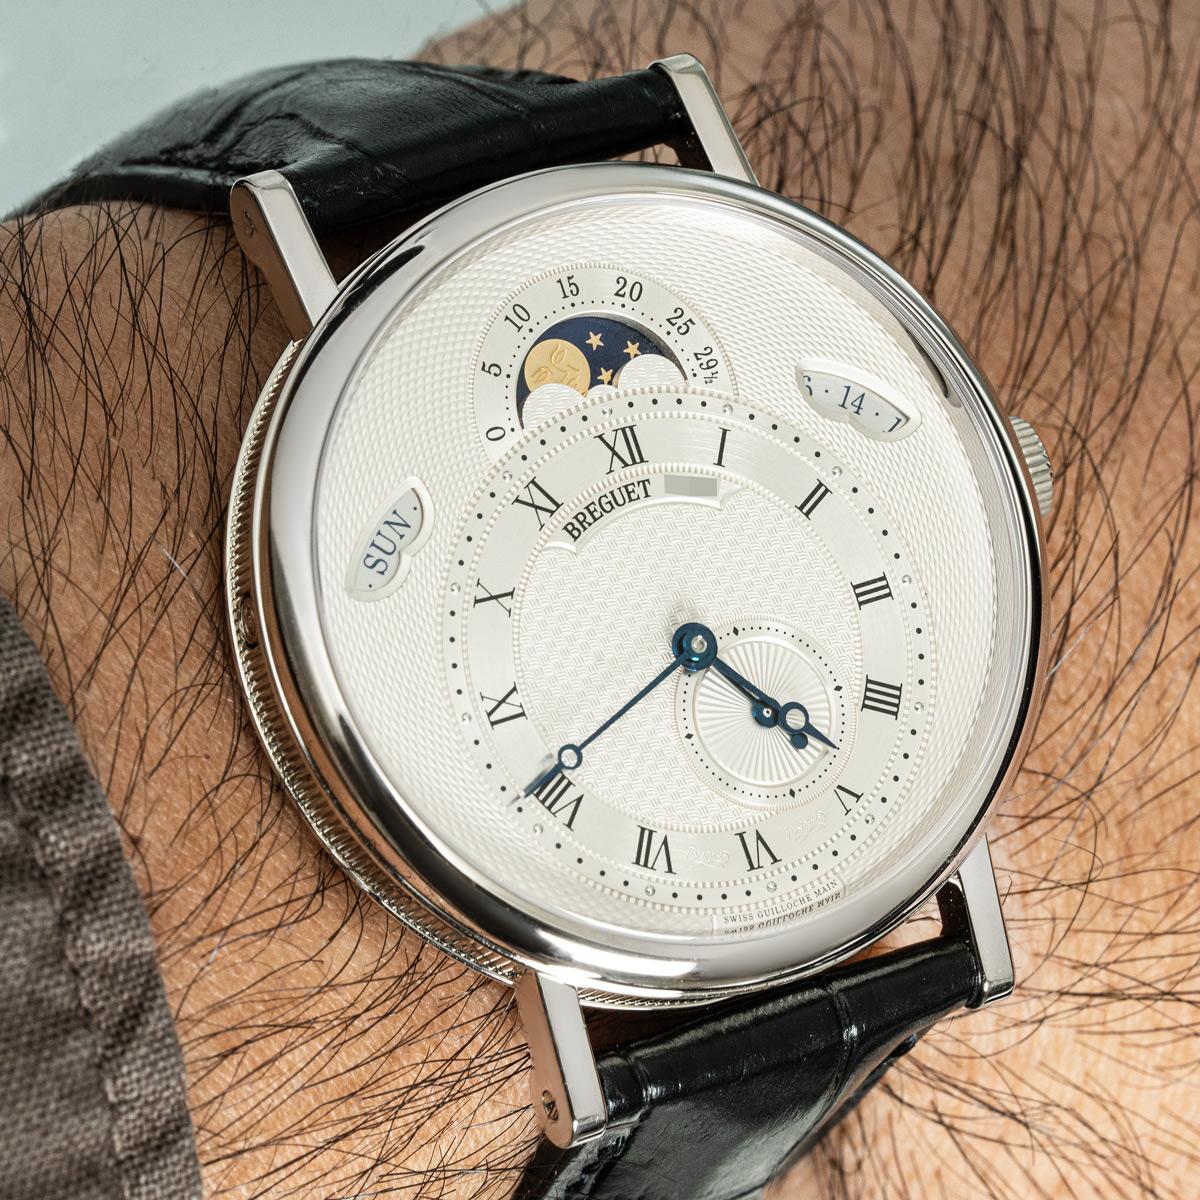 A Breguet Classique Calendrier wristwatch in white gold. Featuring a silver guilloche dial with a date, day and moon phase indicator as well as seconds sub-dial. Fitted with a sapphire glass, a self-winding automatic movement and a black Breguet